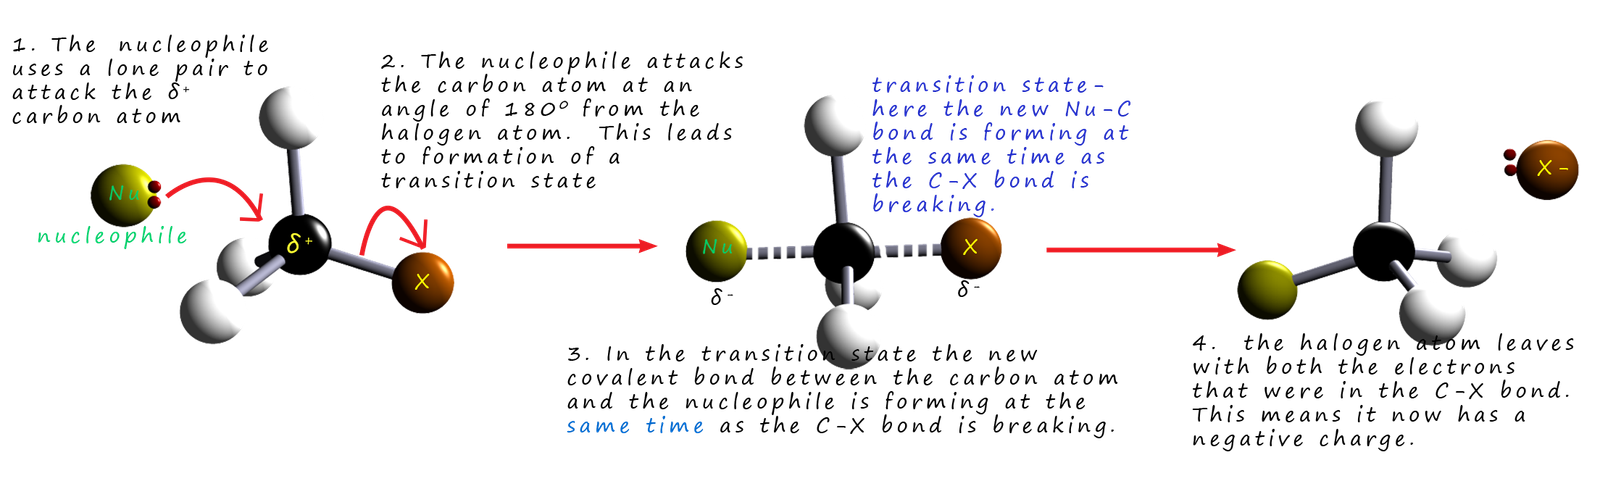 Mechanism of nucleophilic substitution reaction.  shown using 3d models.  The SN2 mechanism.